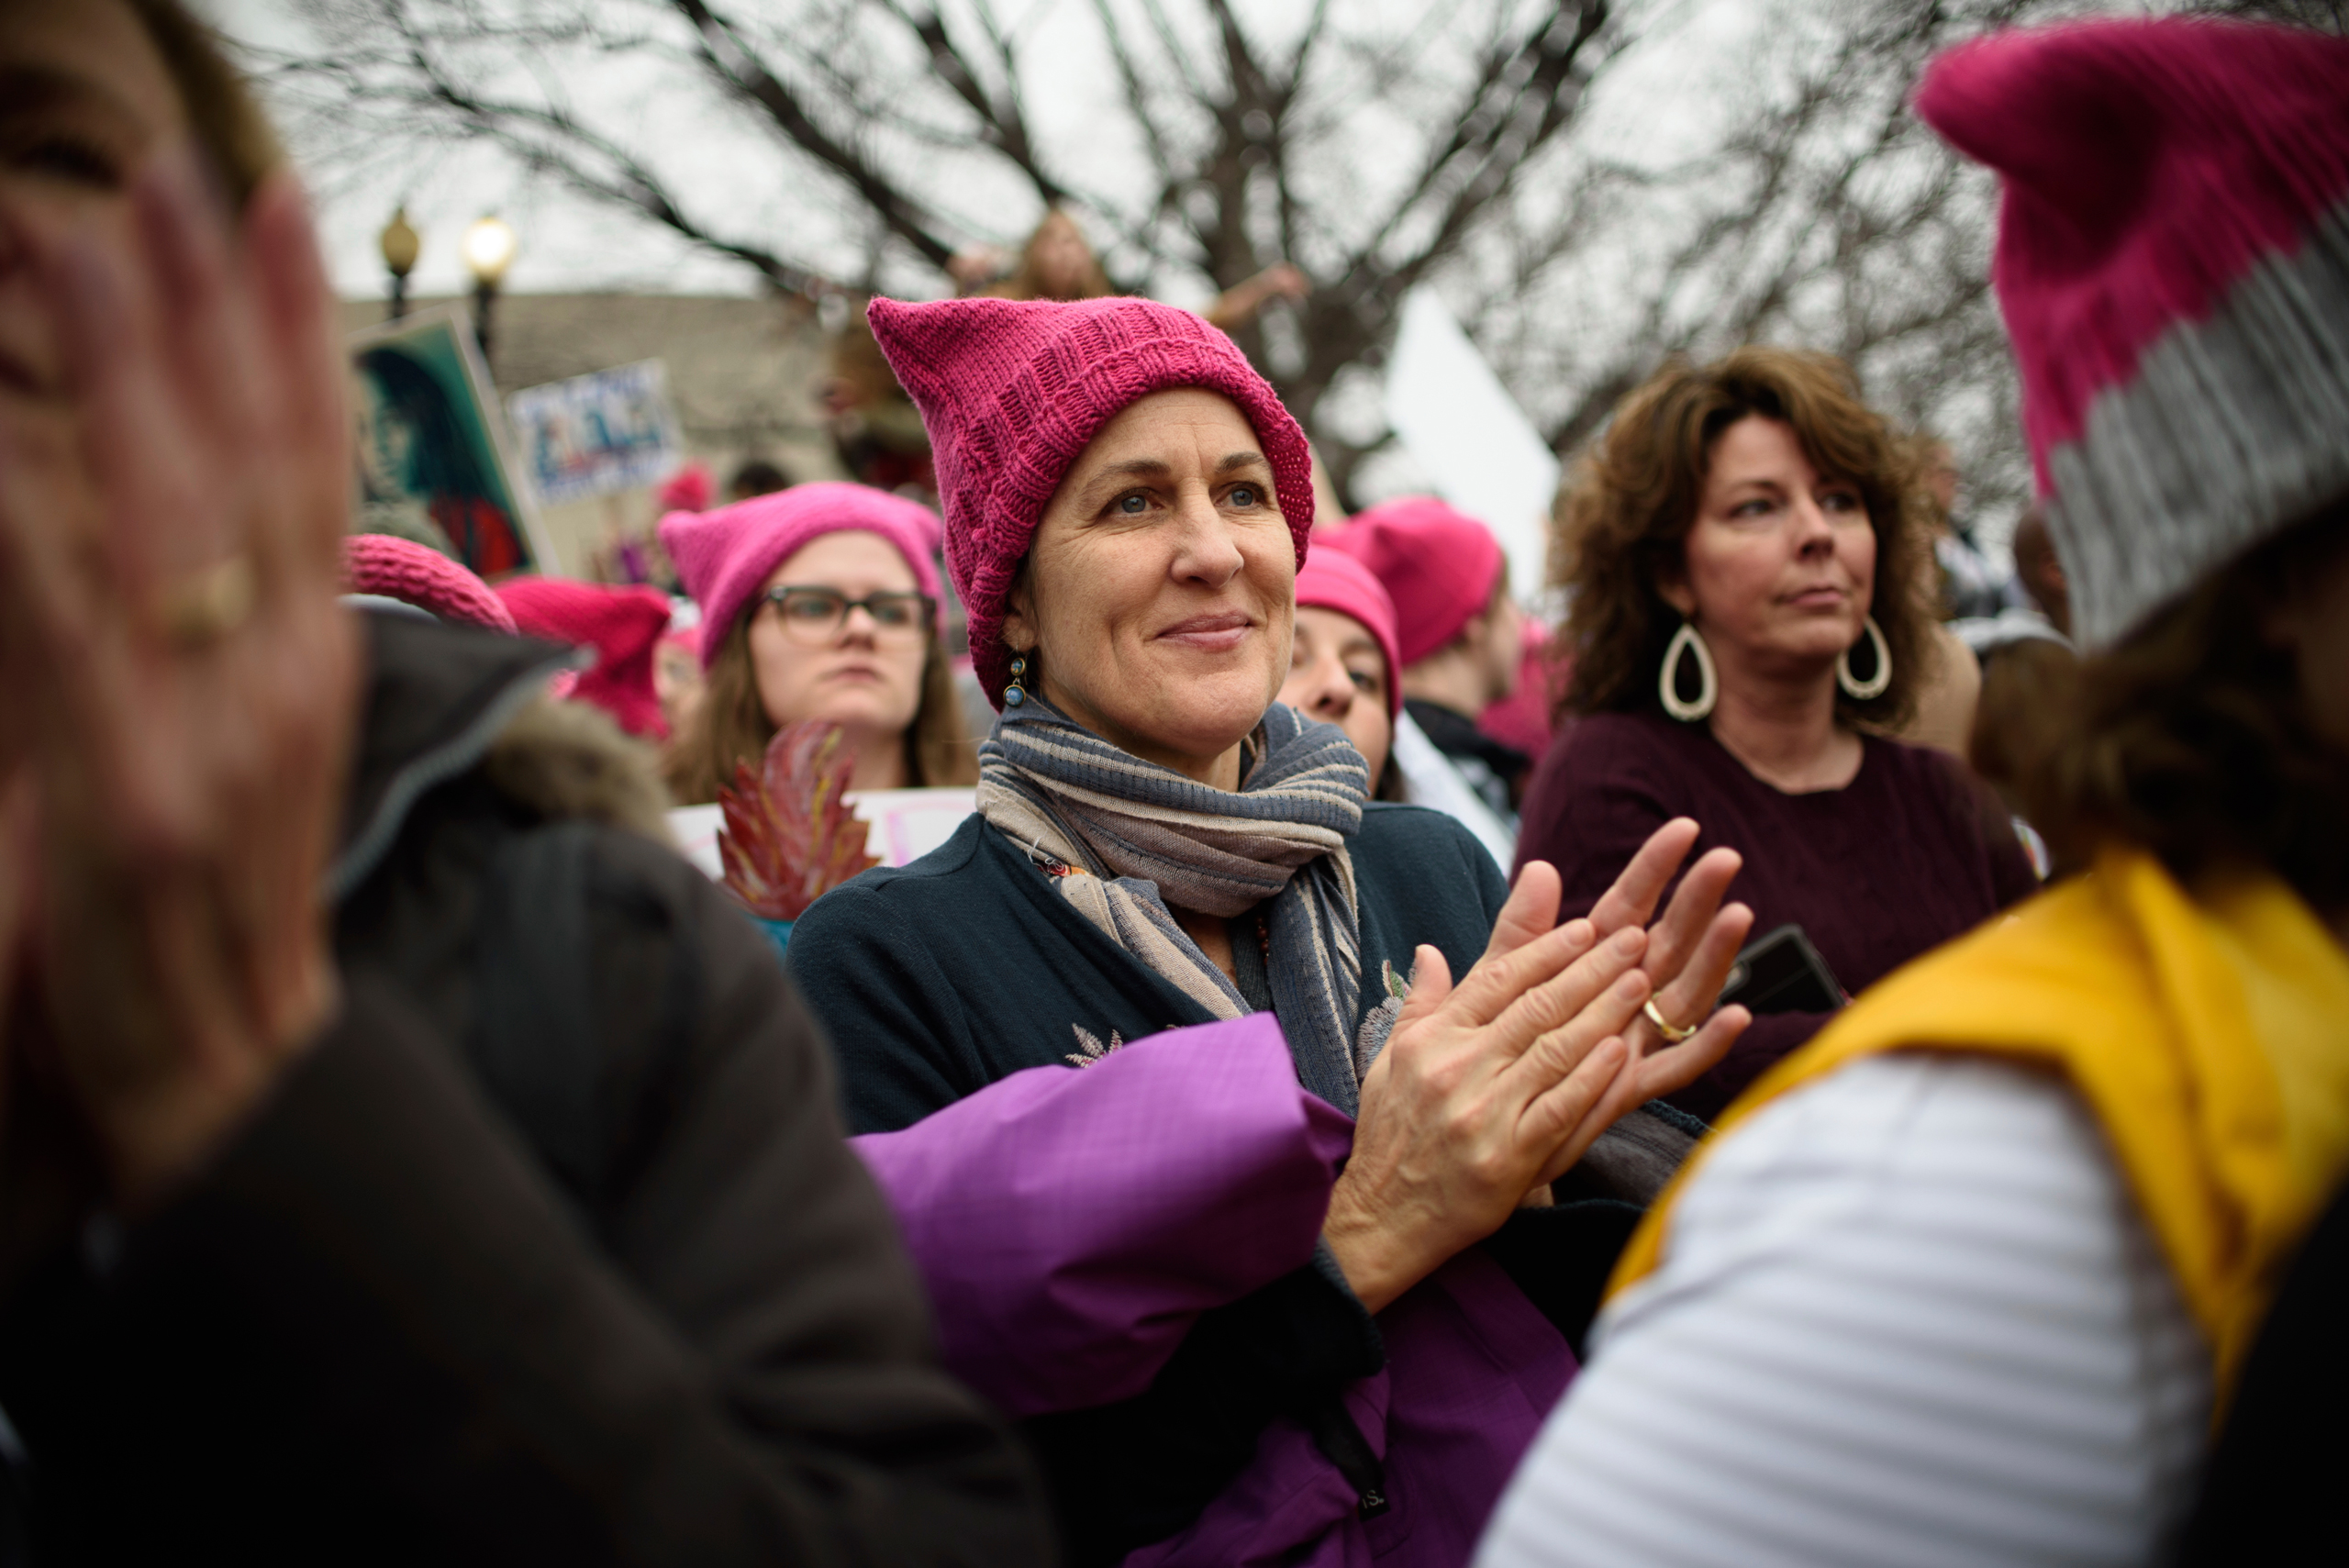 The Million Women's March fills the streets of Washington D.C. on January 21, 2017 following the inauguration of Donald Trump. (Photo by Monica Jorge) *** Please Use Credit from Credit Field ***(Sipa via AP Images)